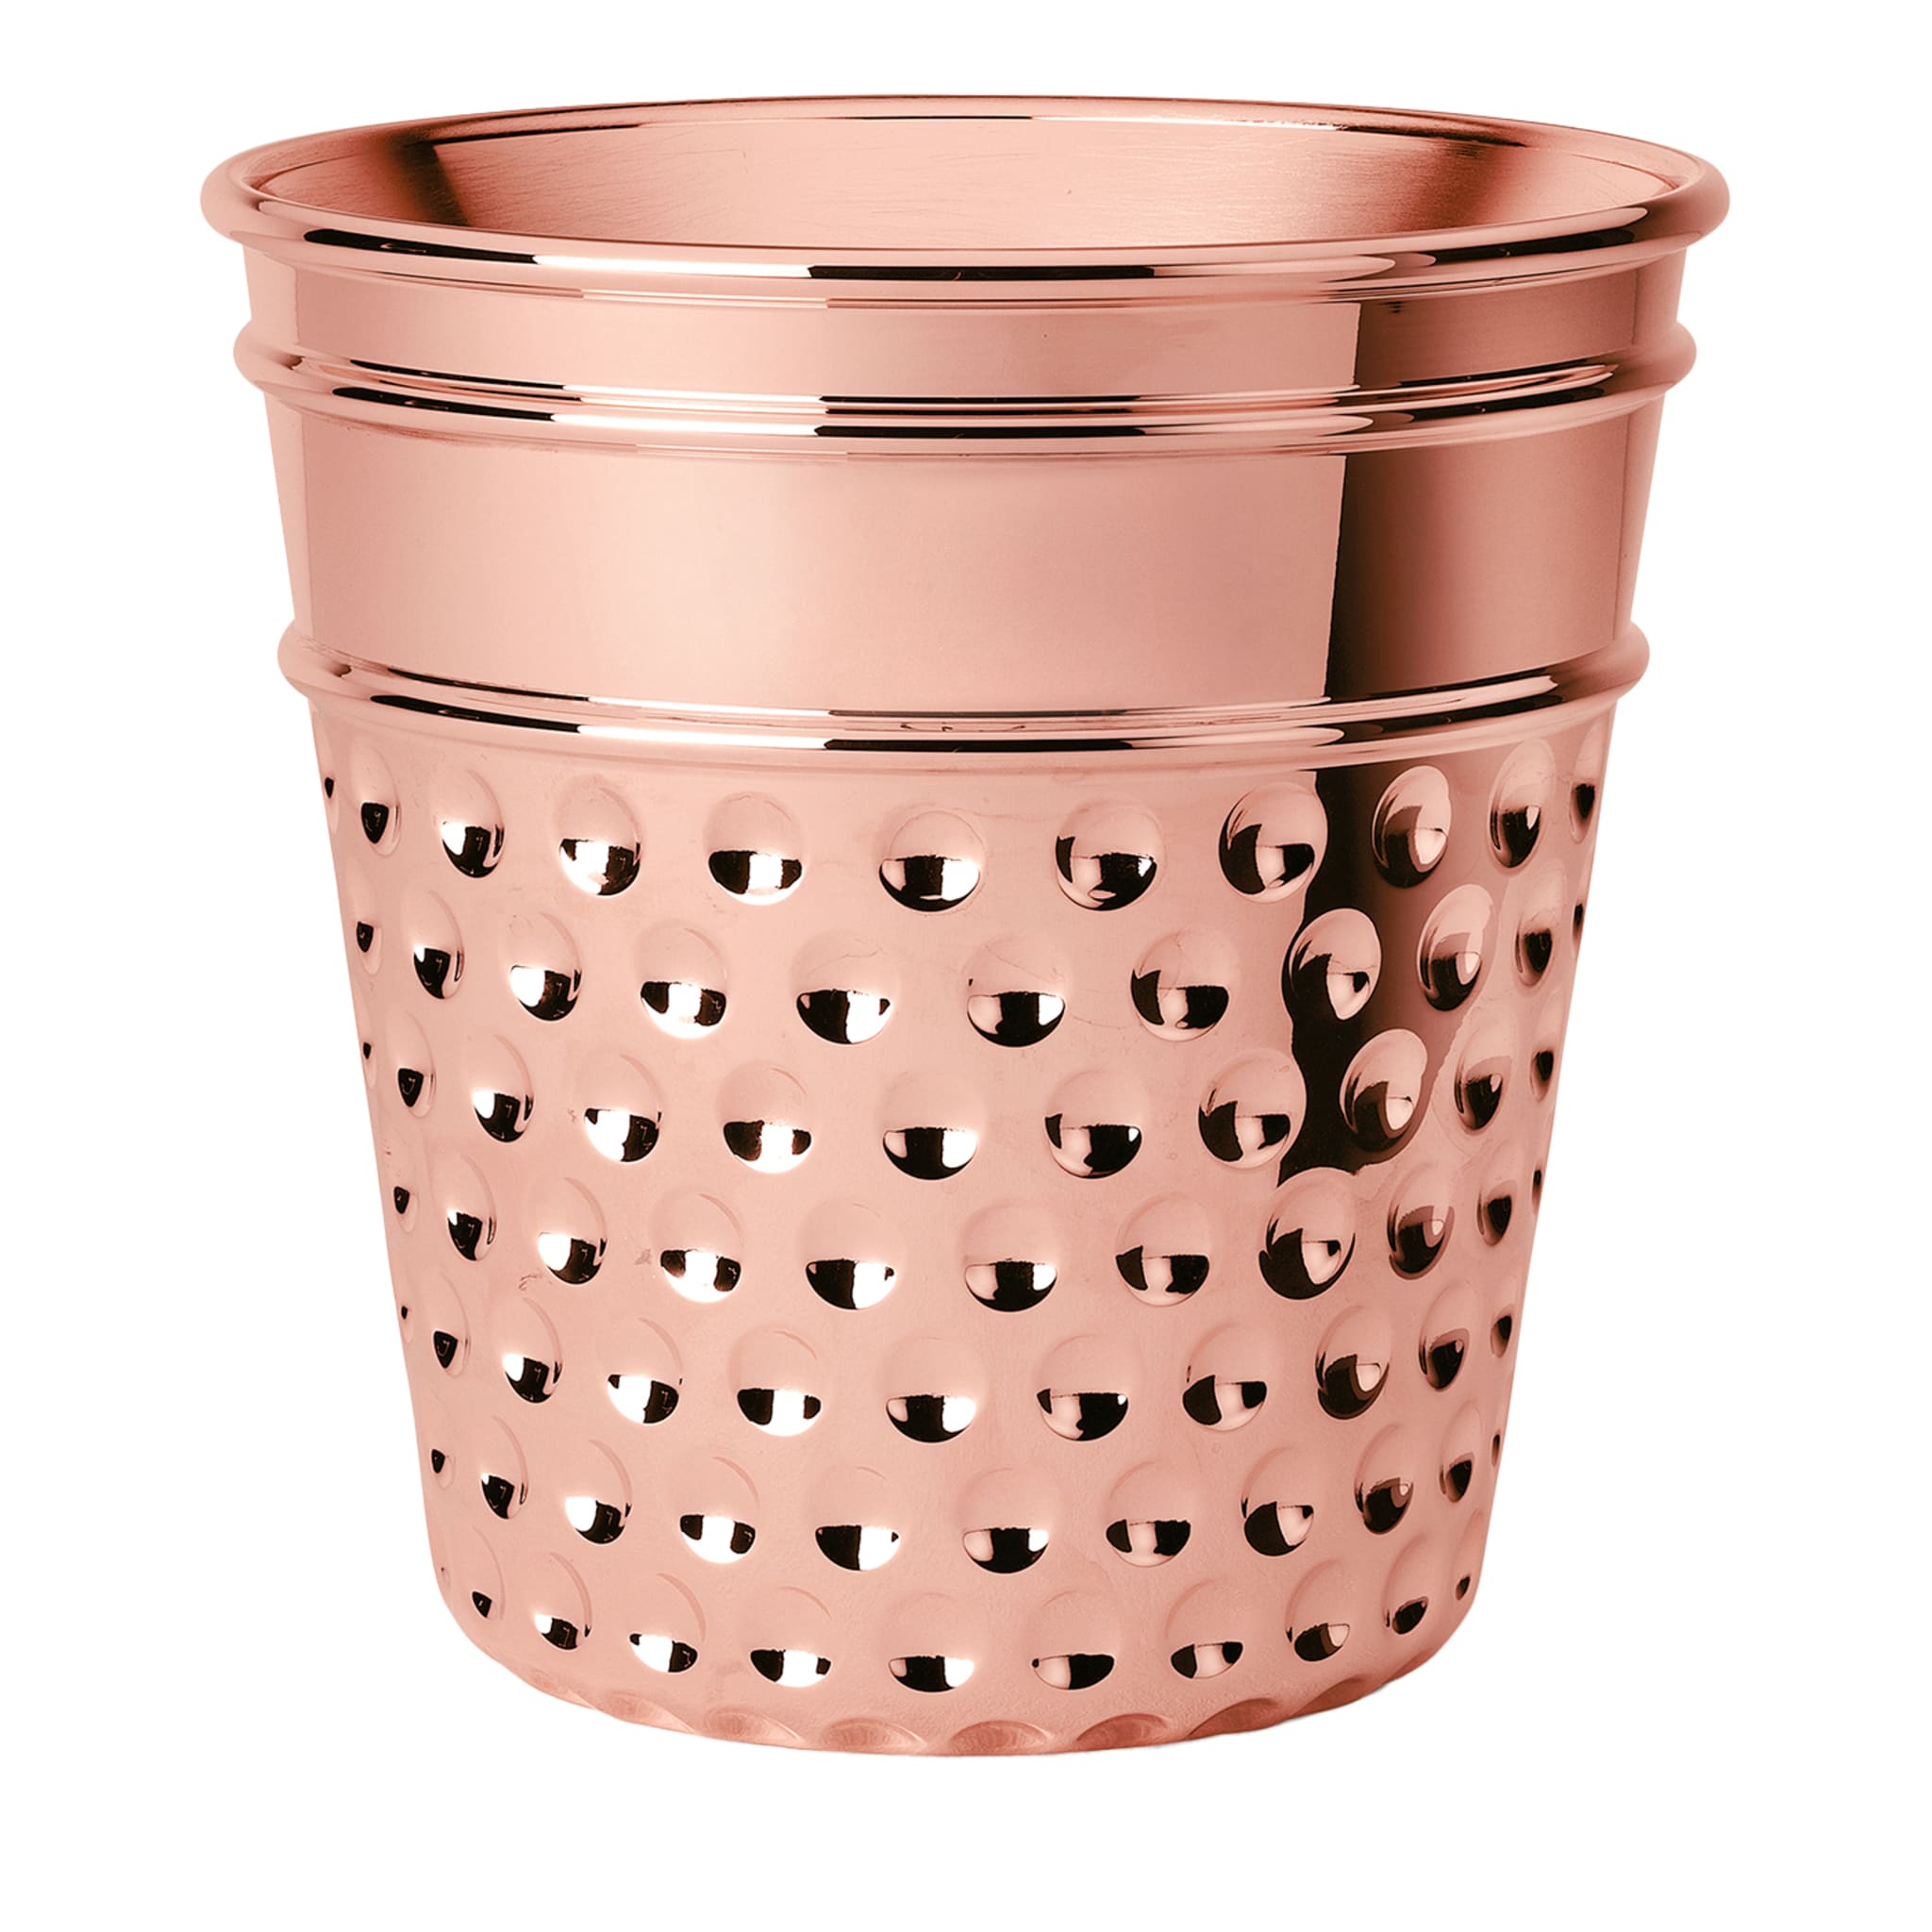 Here Ice Bucket in Copper Finish By Studio Job - Main view